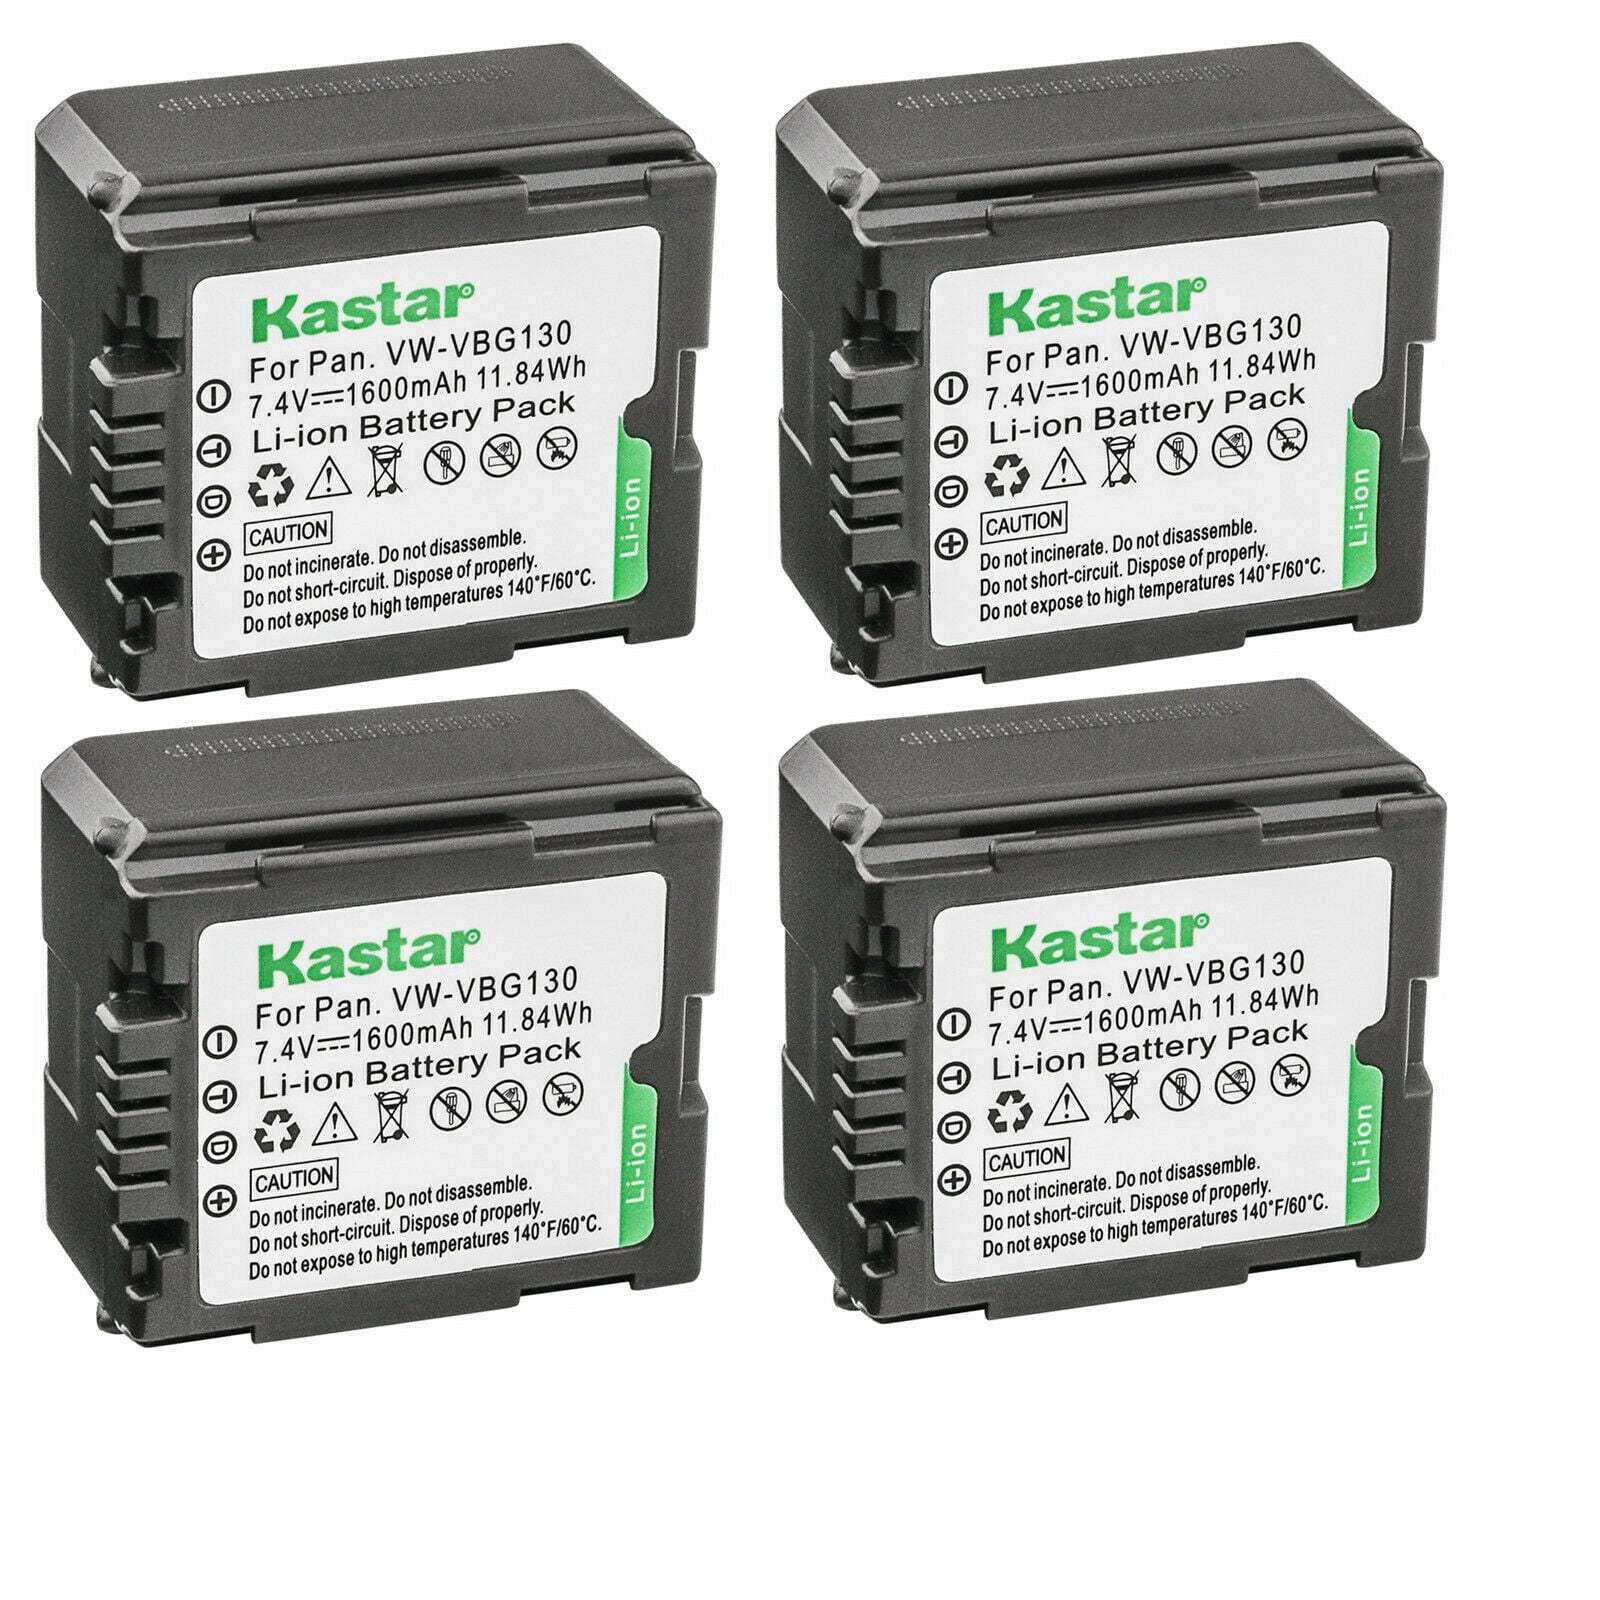 Panasonic VW-VBG070 Kastar 3 Pack Battery and LCD Dual USB Charger Compatible with Panasonic SDR-H79K SDR-H79P SDR-H80PC SDR-H80R VW-VBG260 VW-VBG130 SDR-H80A SDR-H80P SDR-H80K SDR-H80